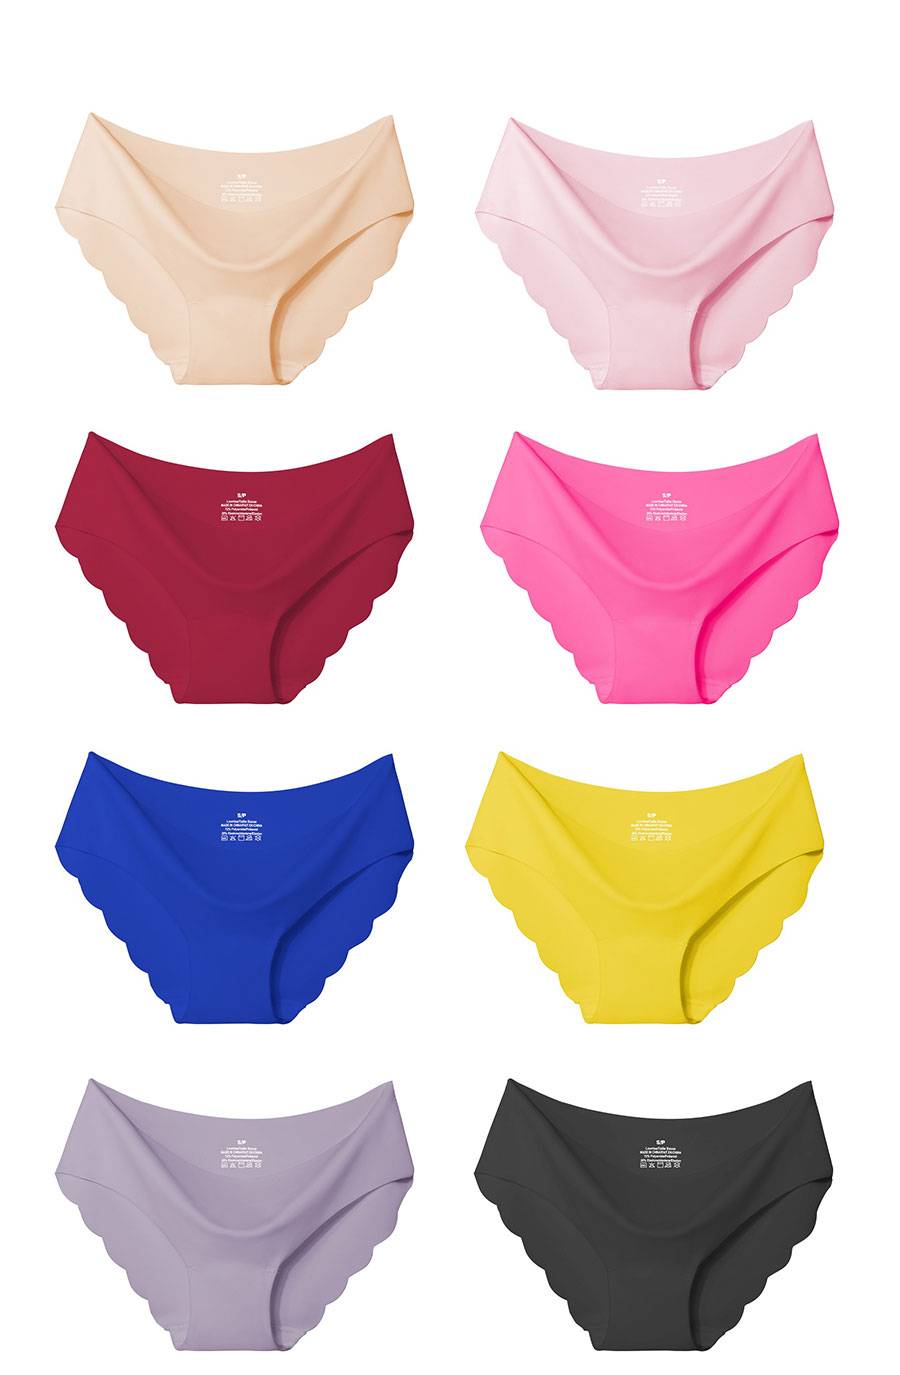 Low-Rise Seamless Panties Set - 3 Pcs - Kawaii Stop - Bamboo, Briefs, Cotton, Cute, Fiber, Intimates, Low-Rise, Modal, Nylon, Panties, Panty, Ruffles, Sexy, Sexy Lingerie, Sexy Products, Solid, Spandex, Underwear, Women's, Women's Clothing &amp; Accessories